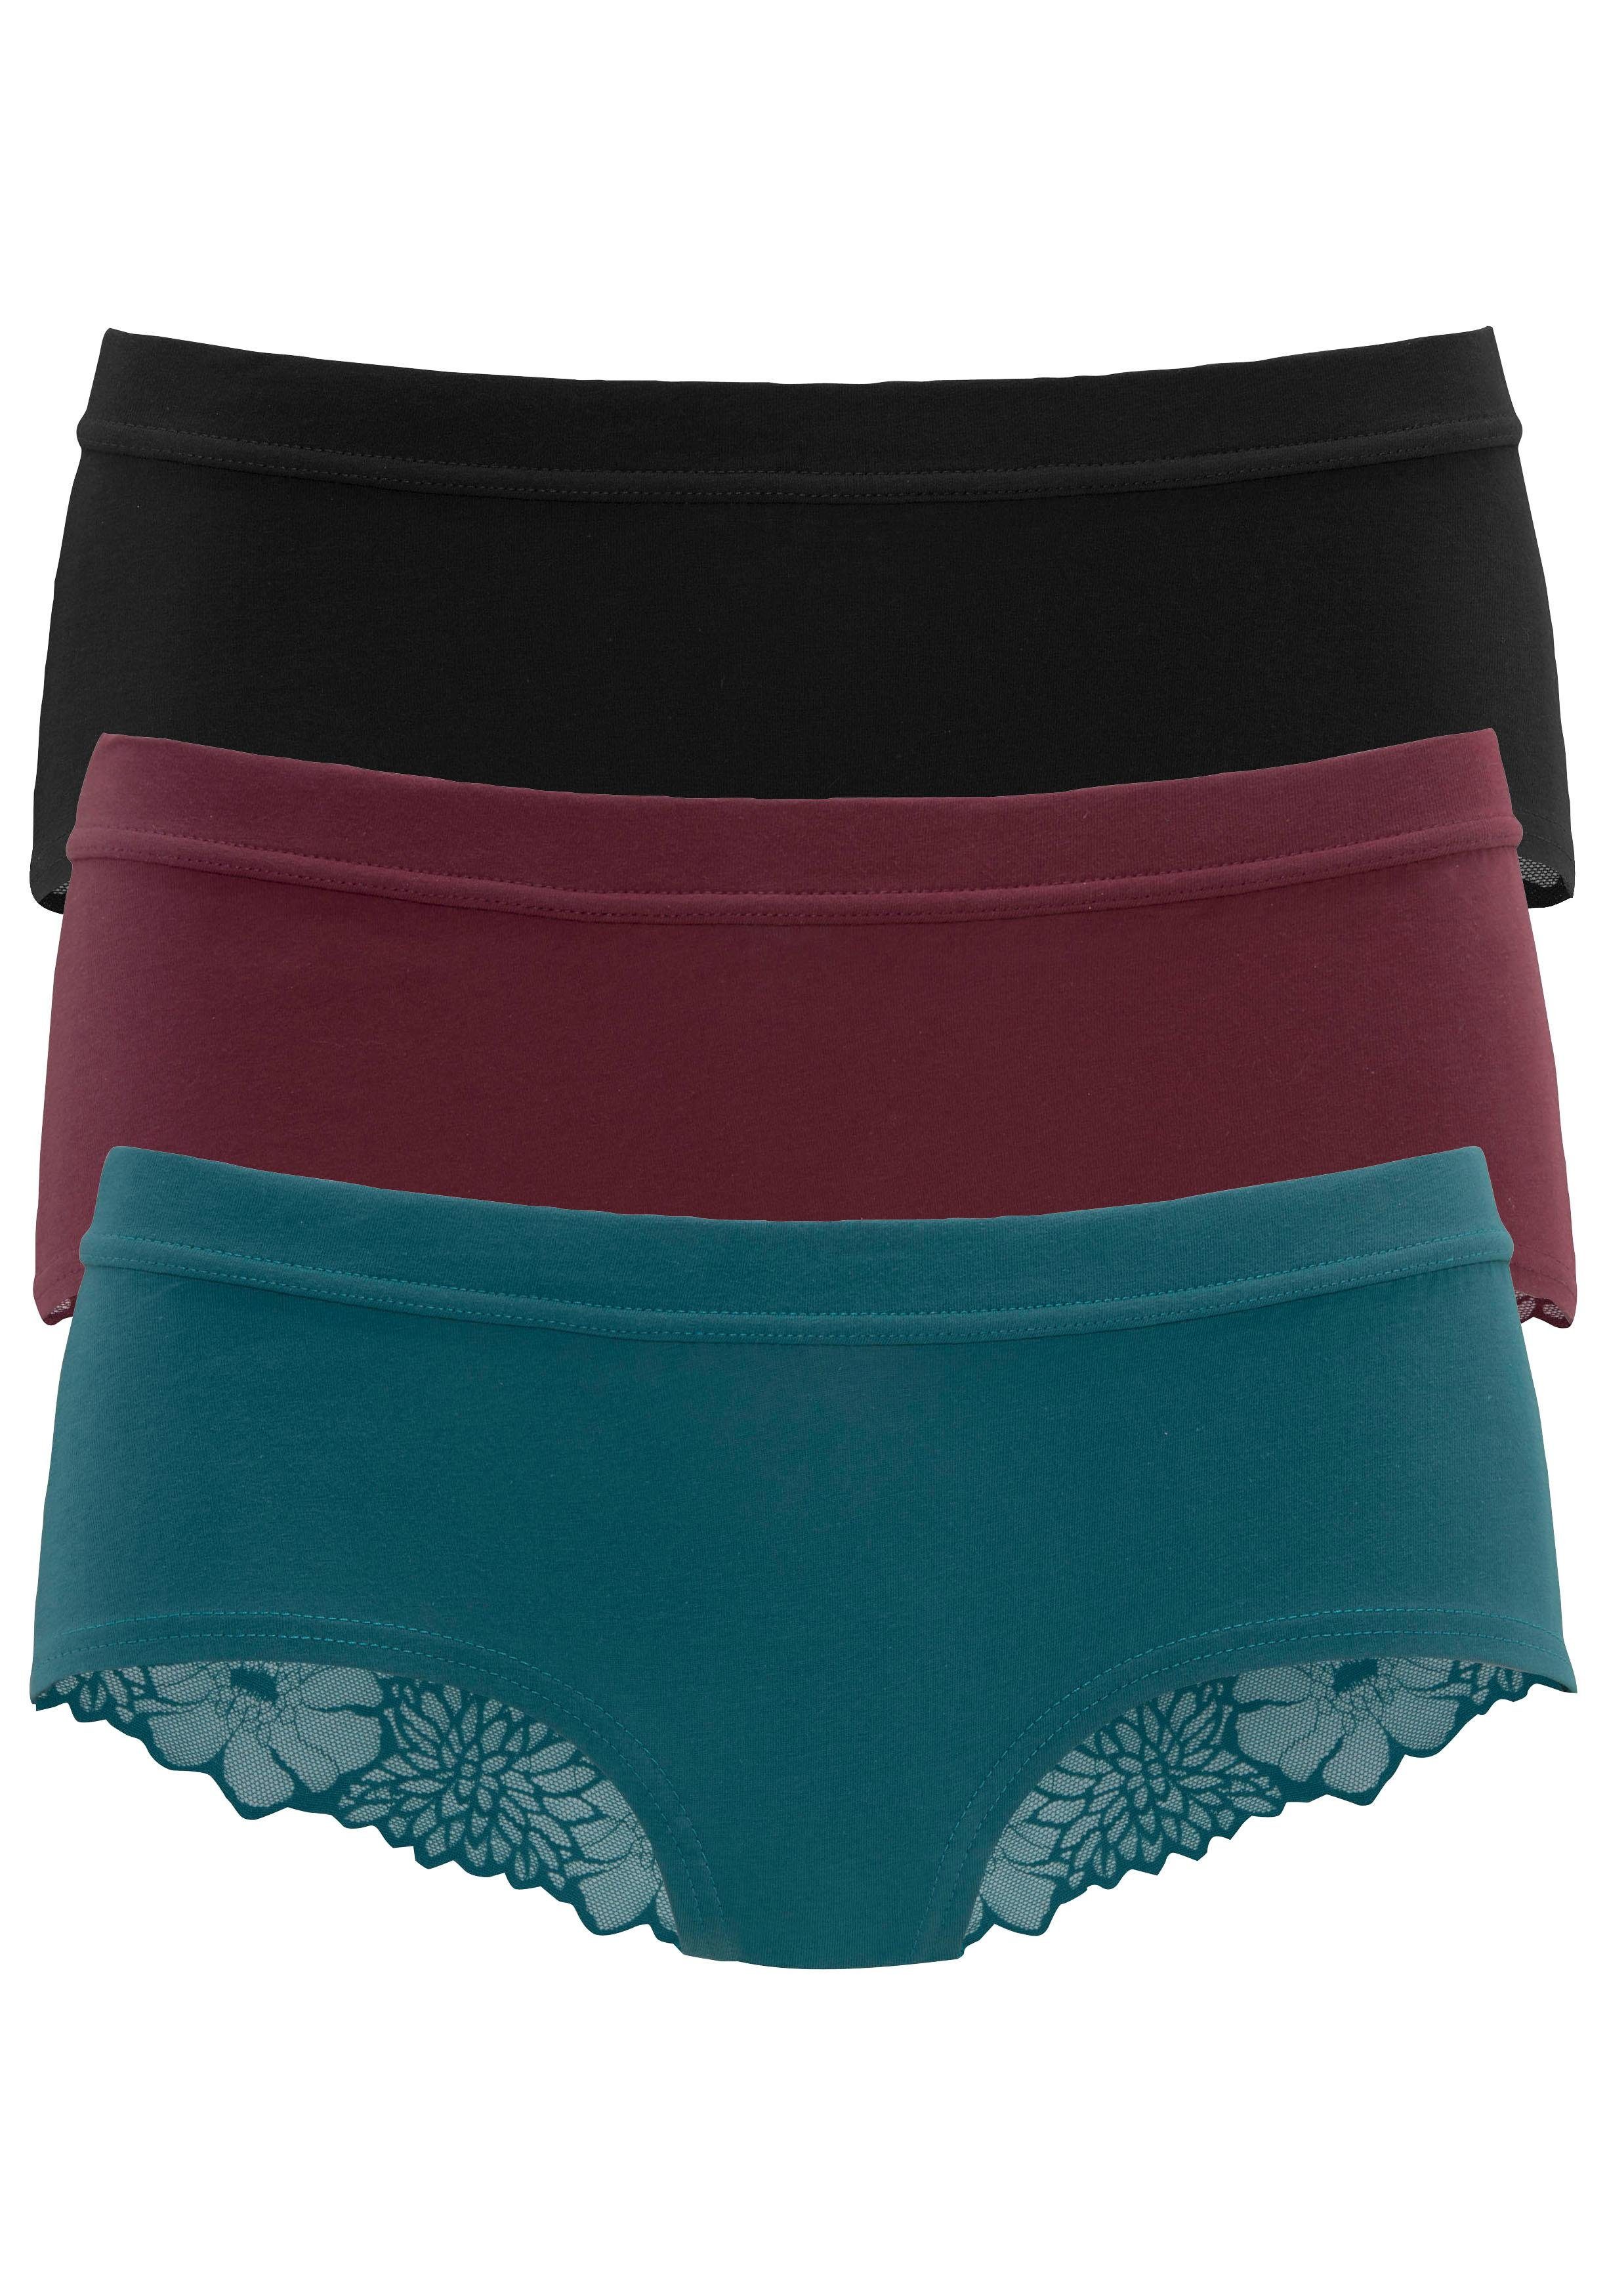 LASCANA Panty (Packung, 3er-Pack) online kaufen | OTTO